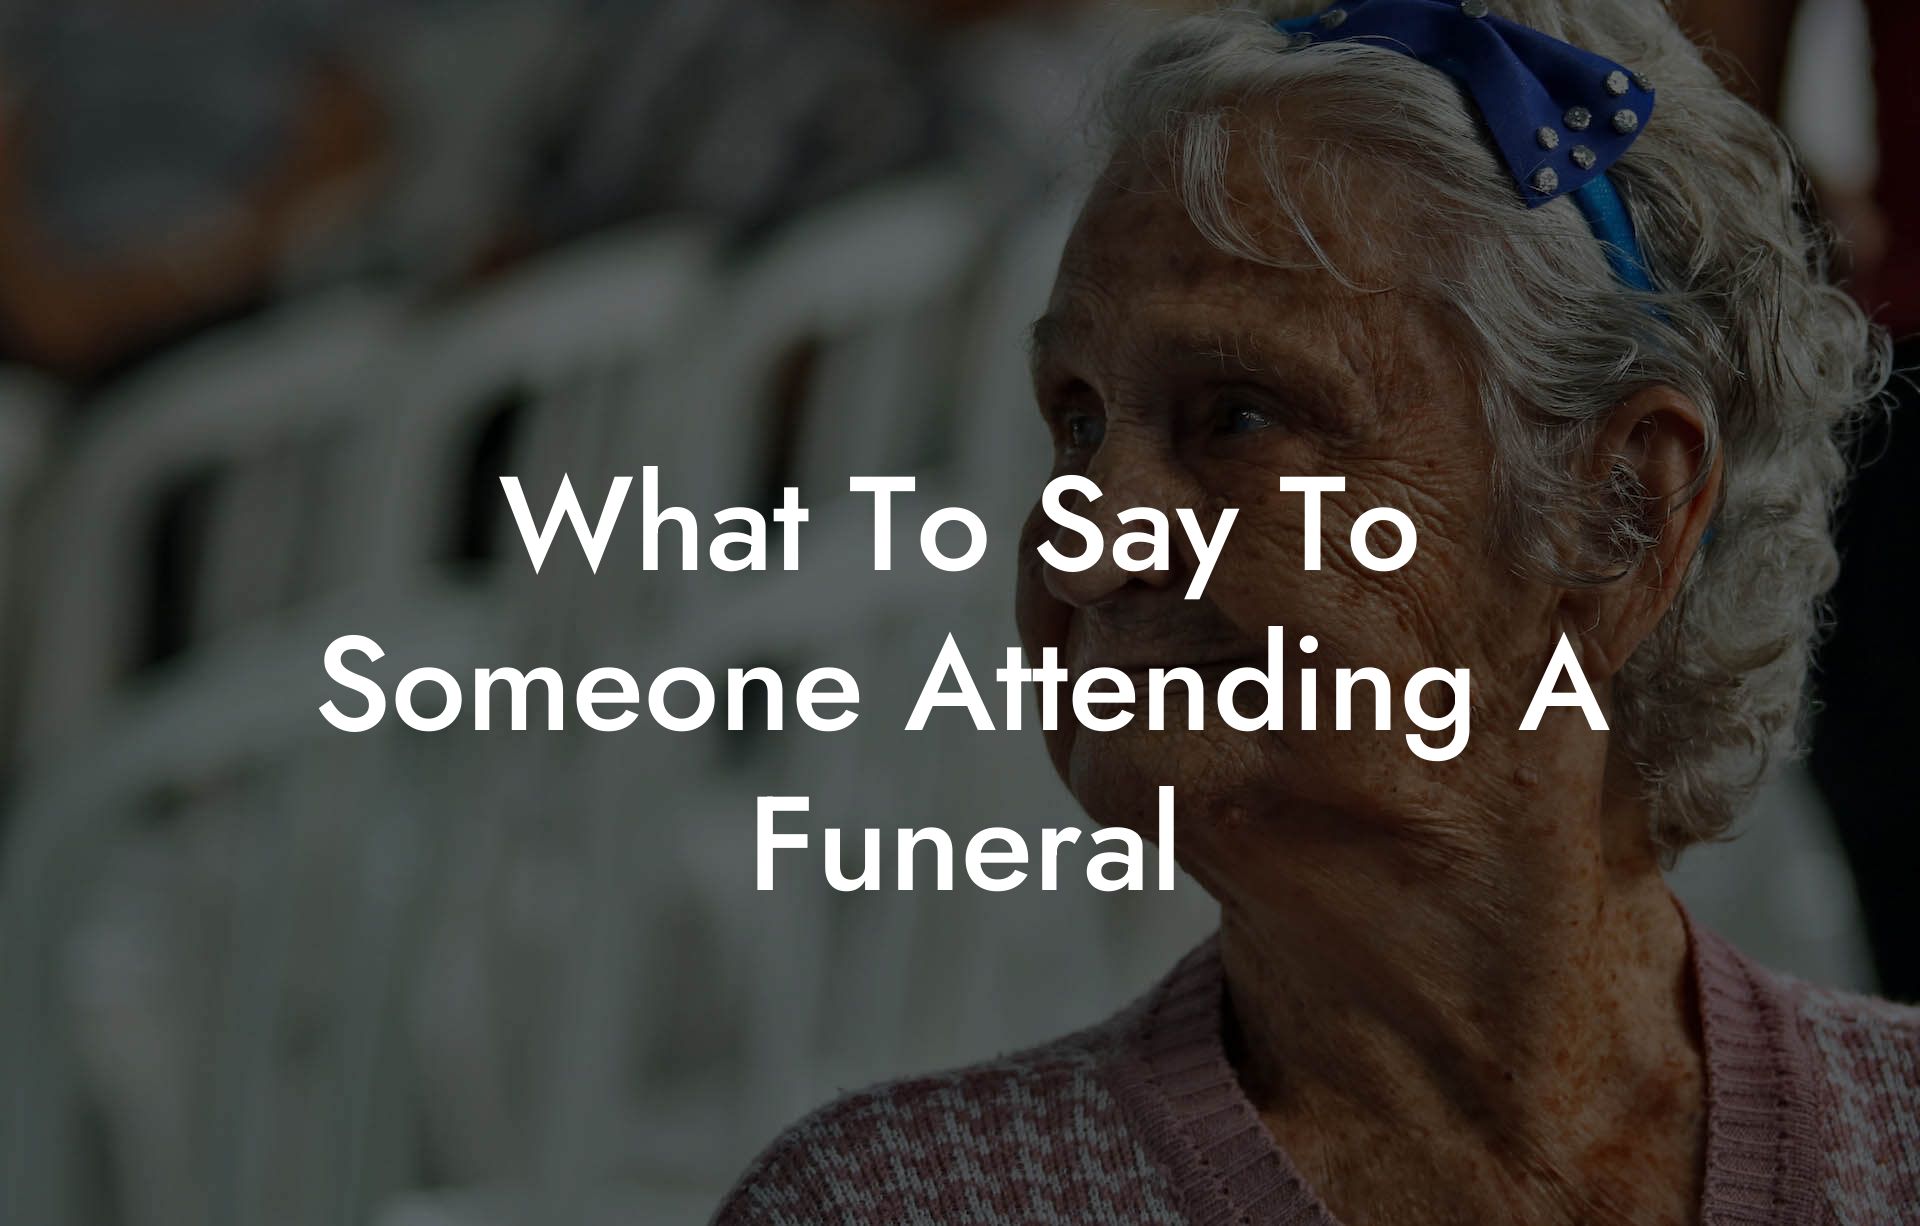 What To Say To Someone Attending A Funeral